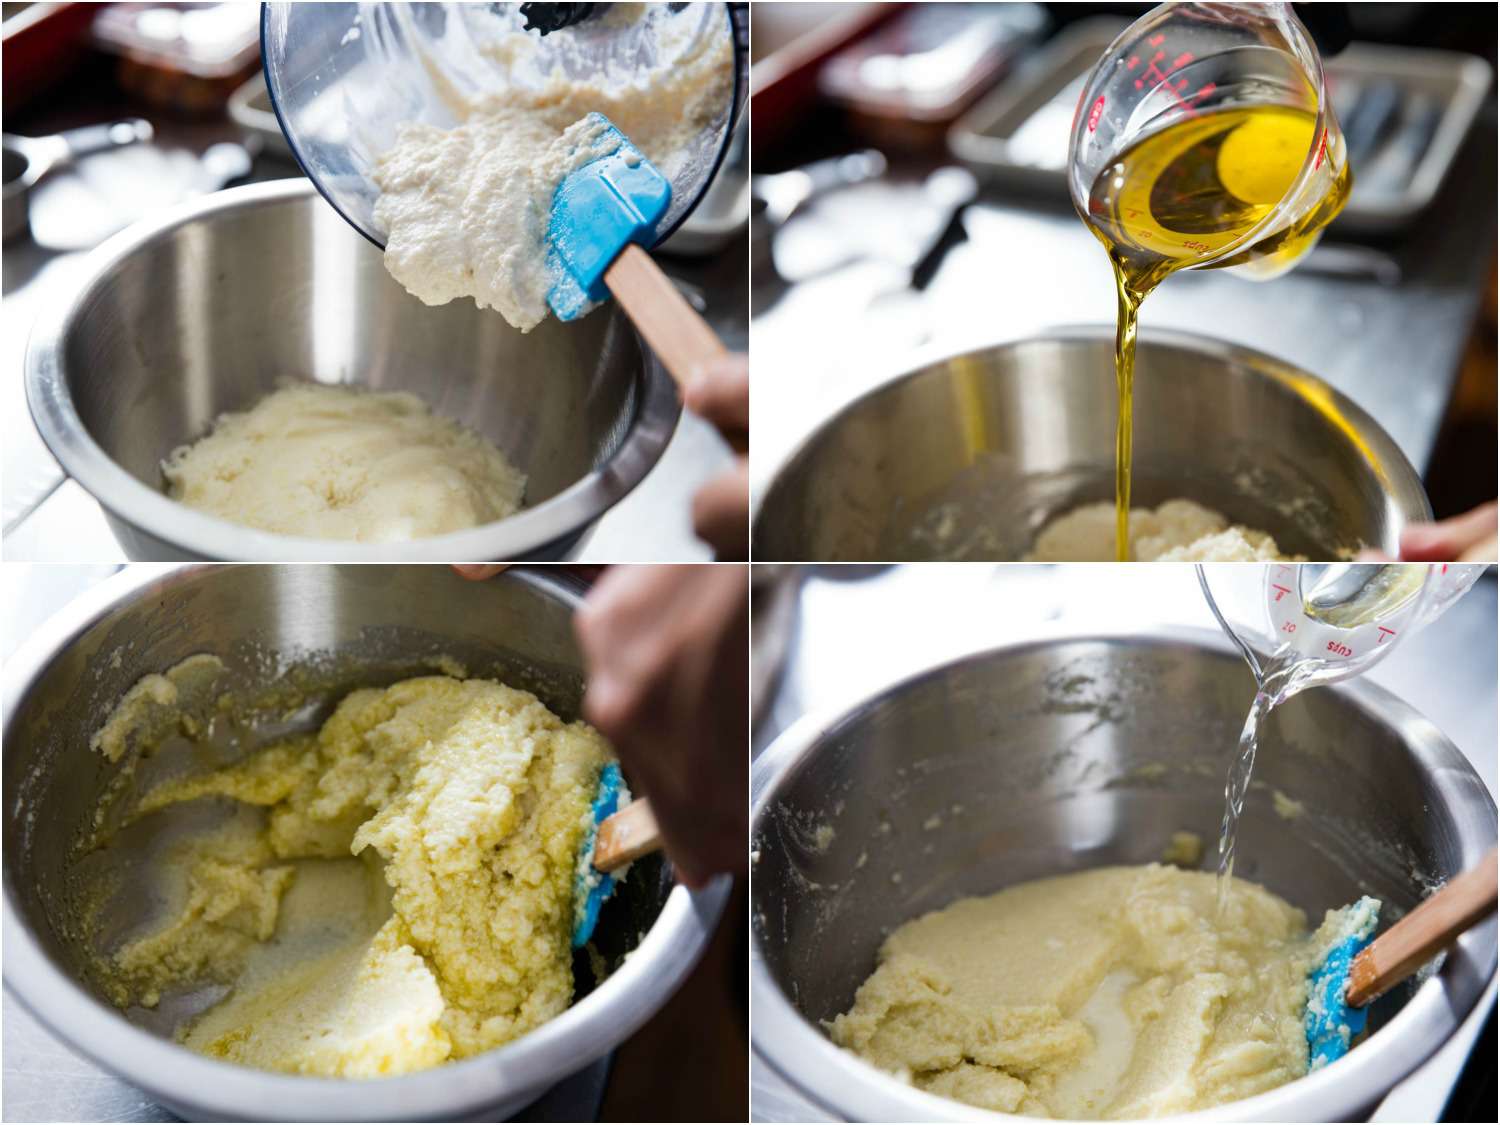 Collage of ingredients being added and mixed into Greek potato puree in silver mixing bowl.